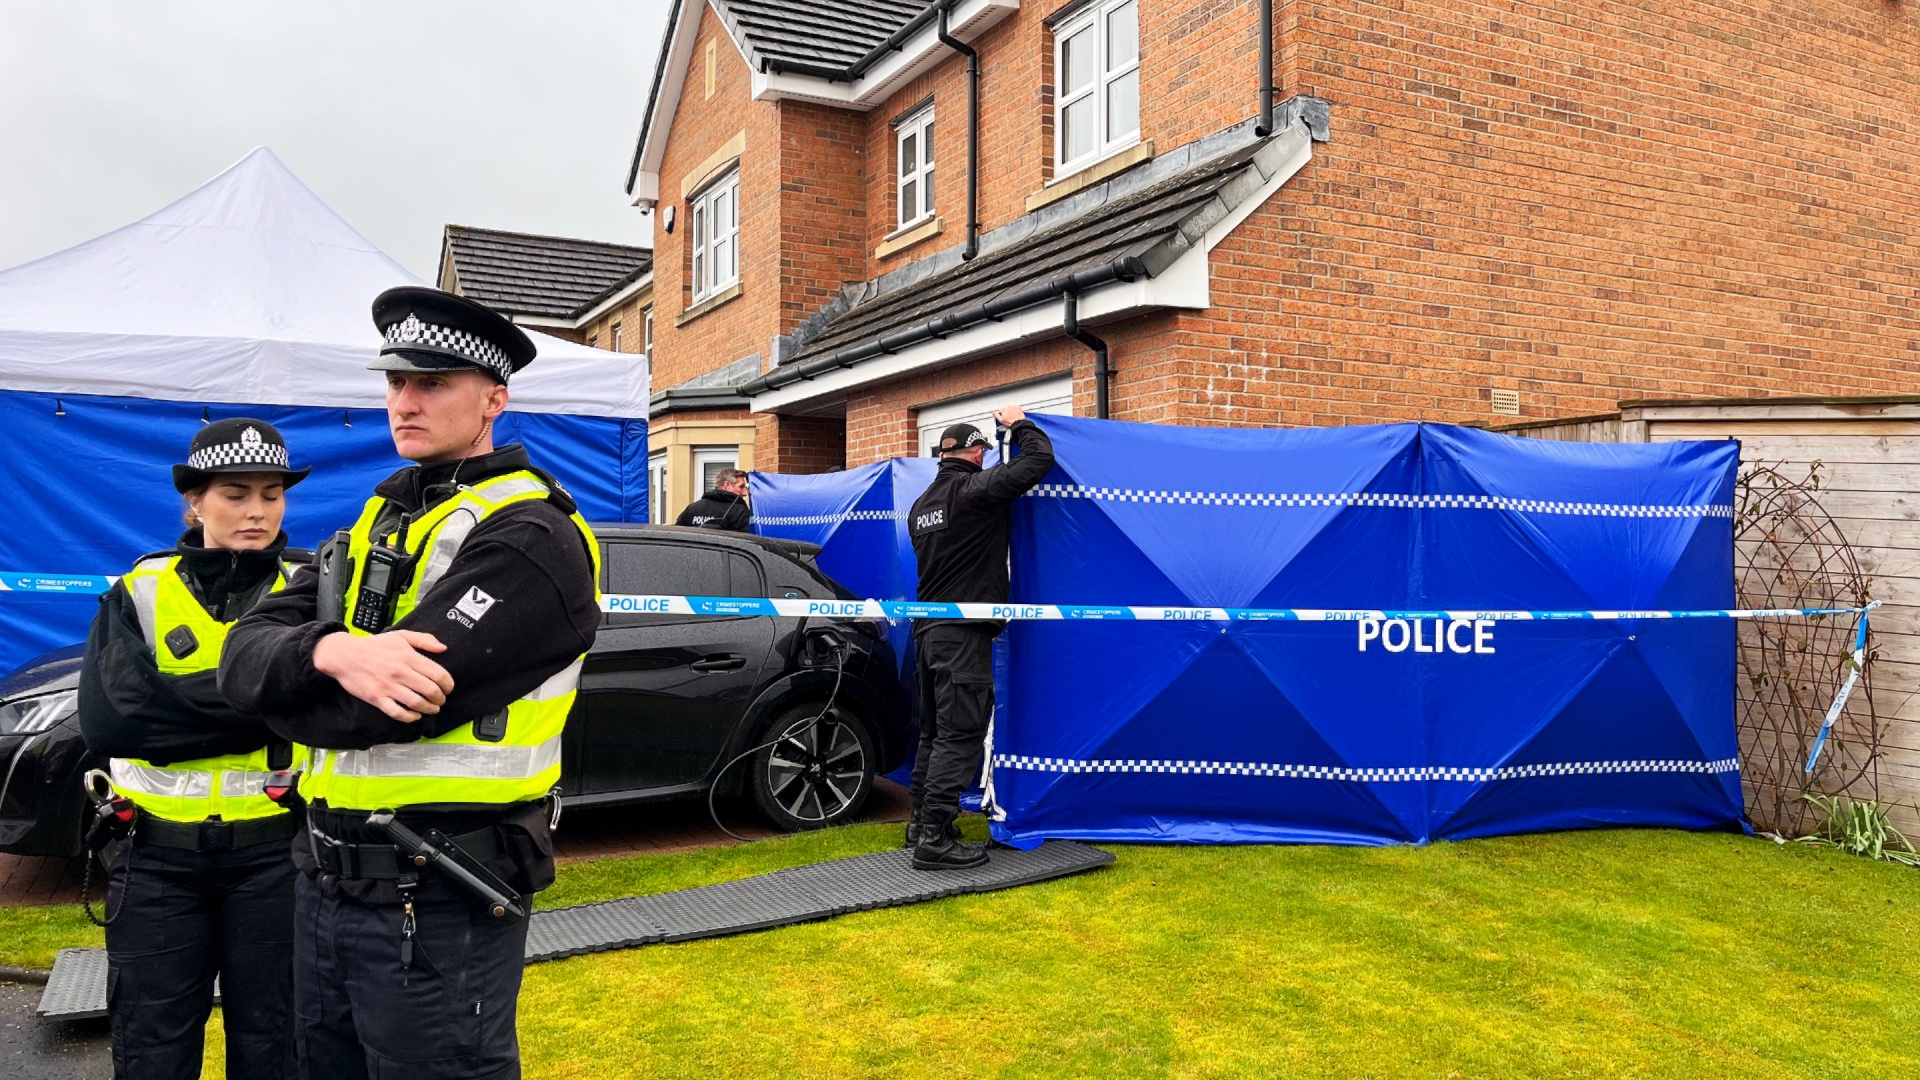 Operation Branchfrom has led to three high-profile arrests of key SNP figures and Nicola Sturgeon's home being searched.